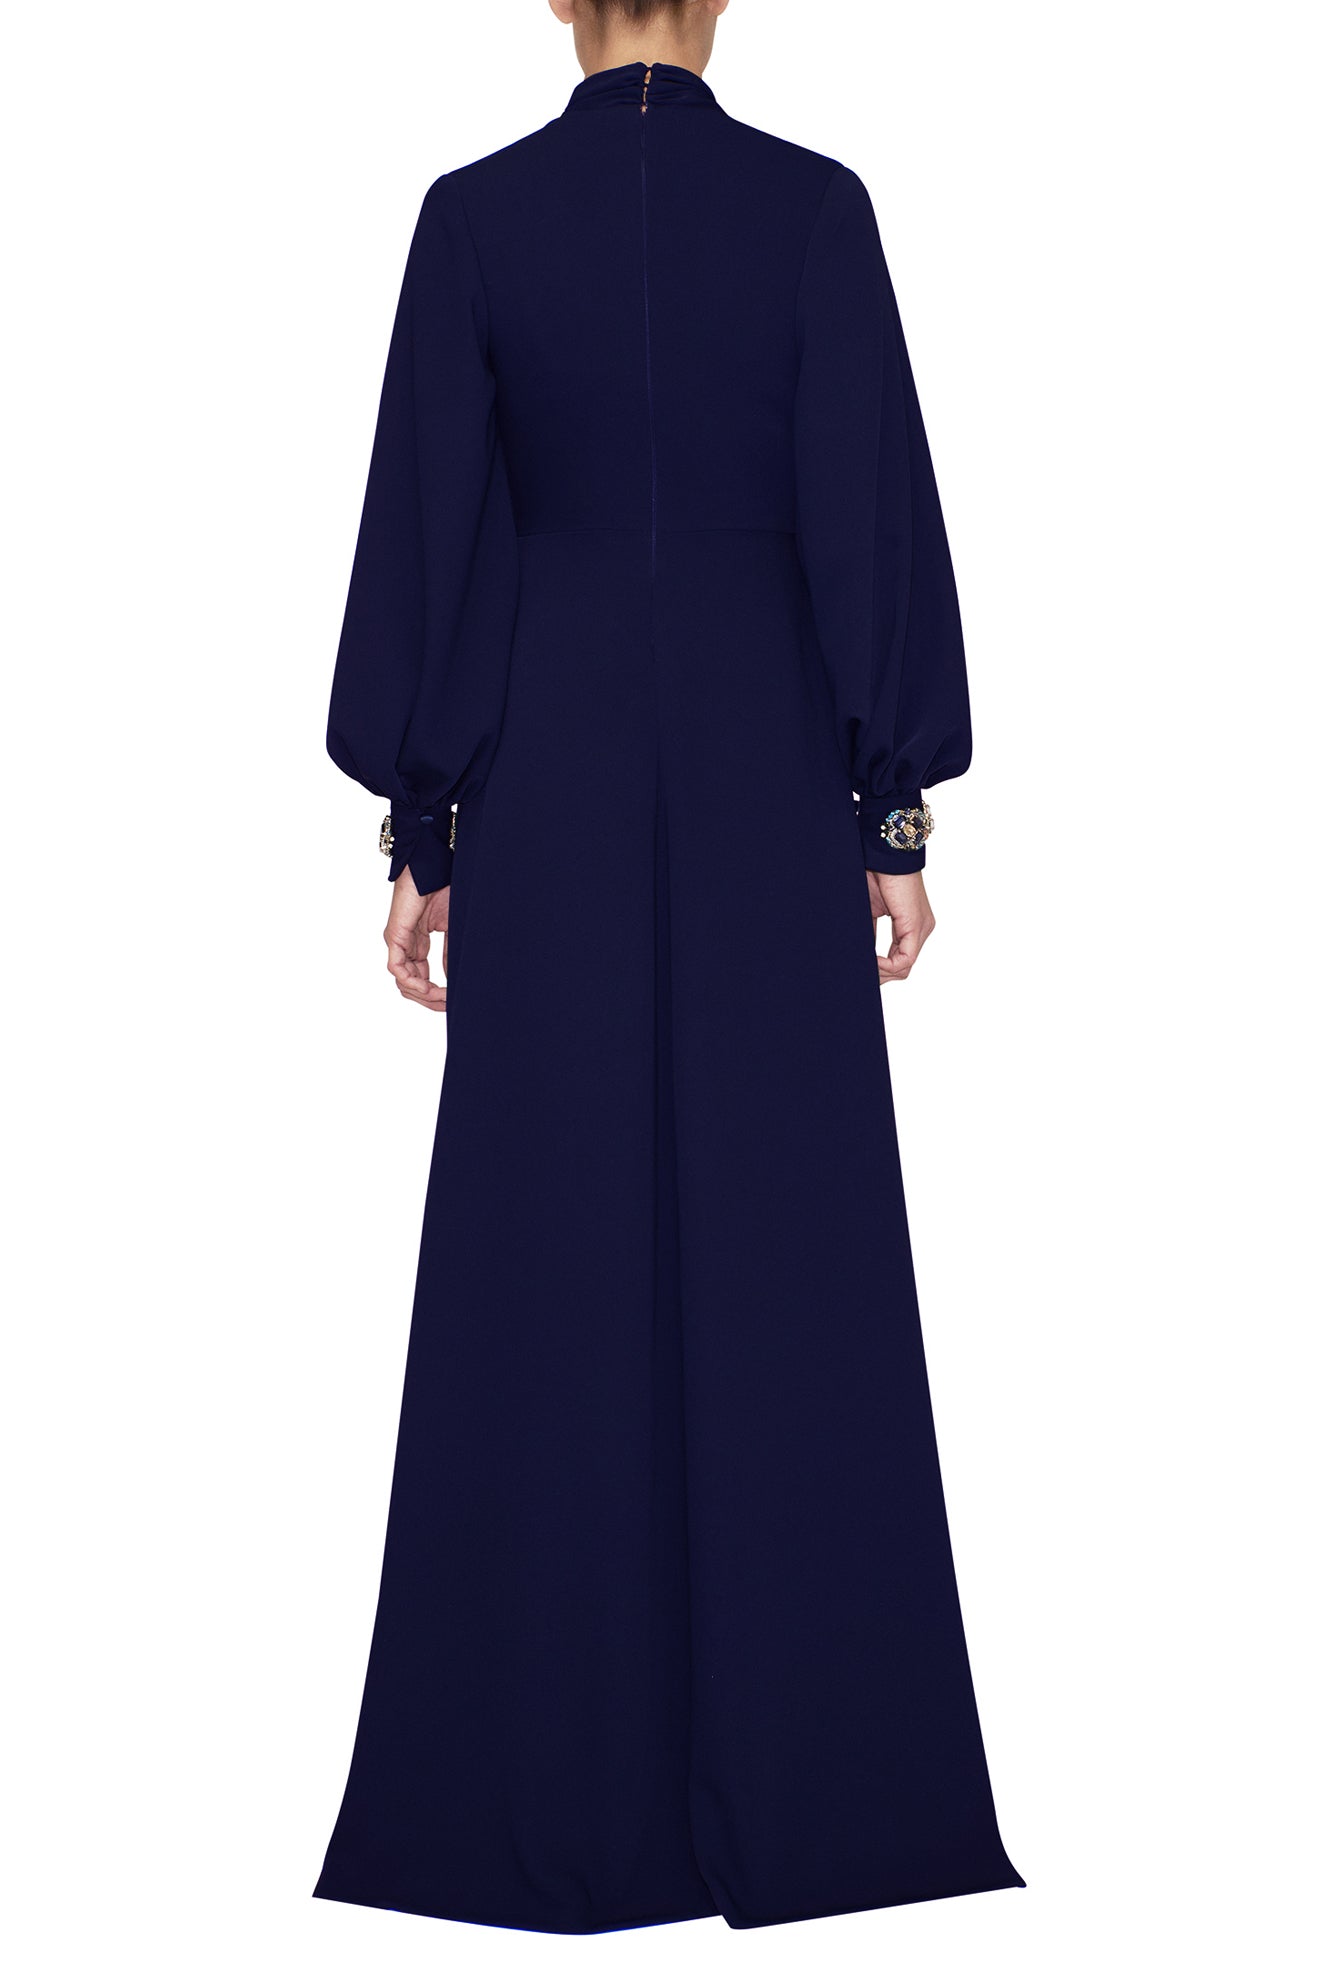 BLOUSON SLEEVE, FAUX WRAP DRESS WITH EMBROIDERED APPLIQUES – ReemAcra